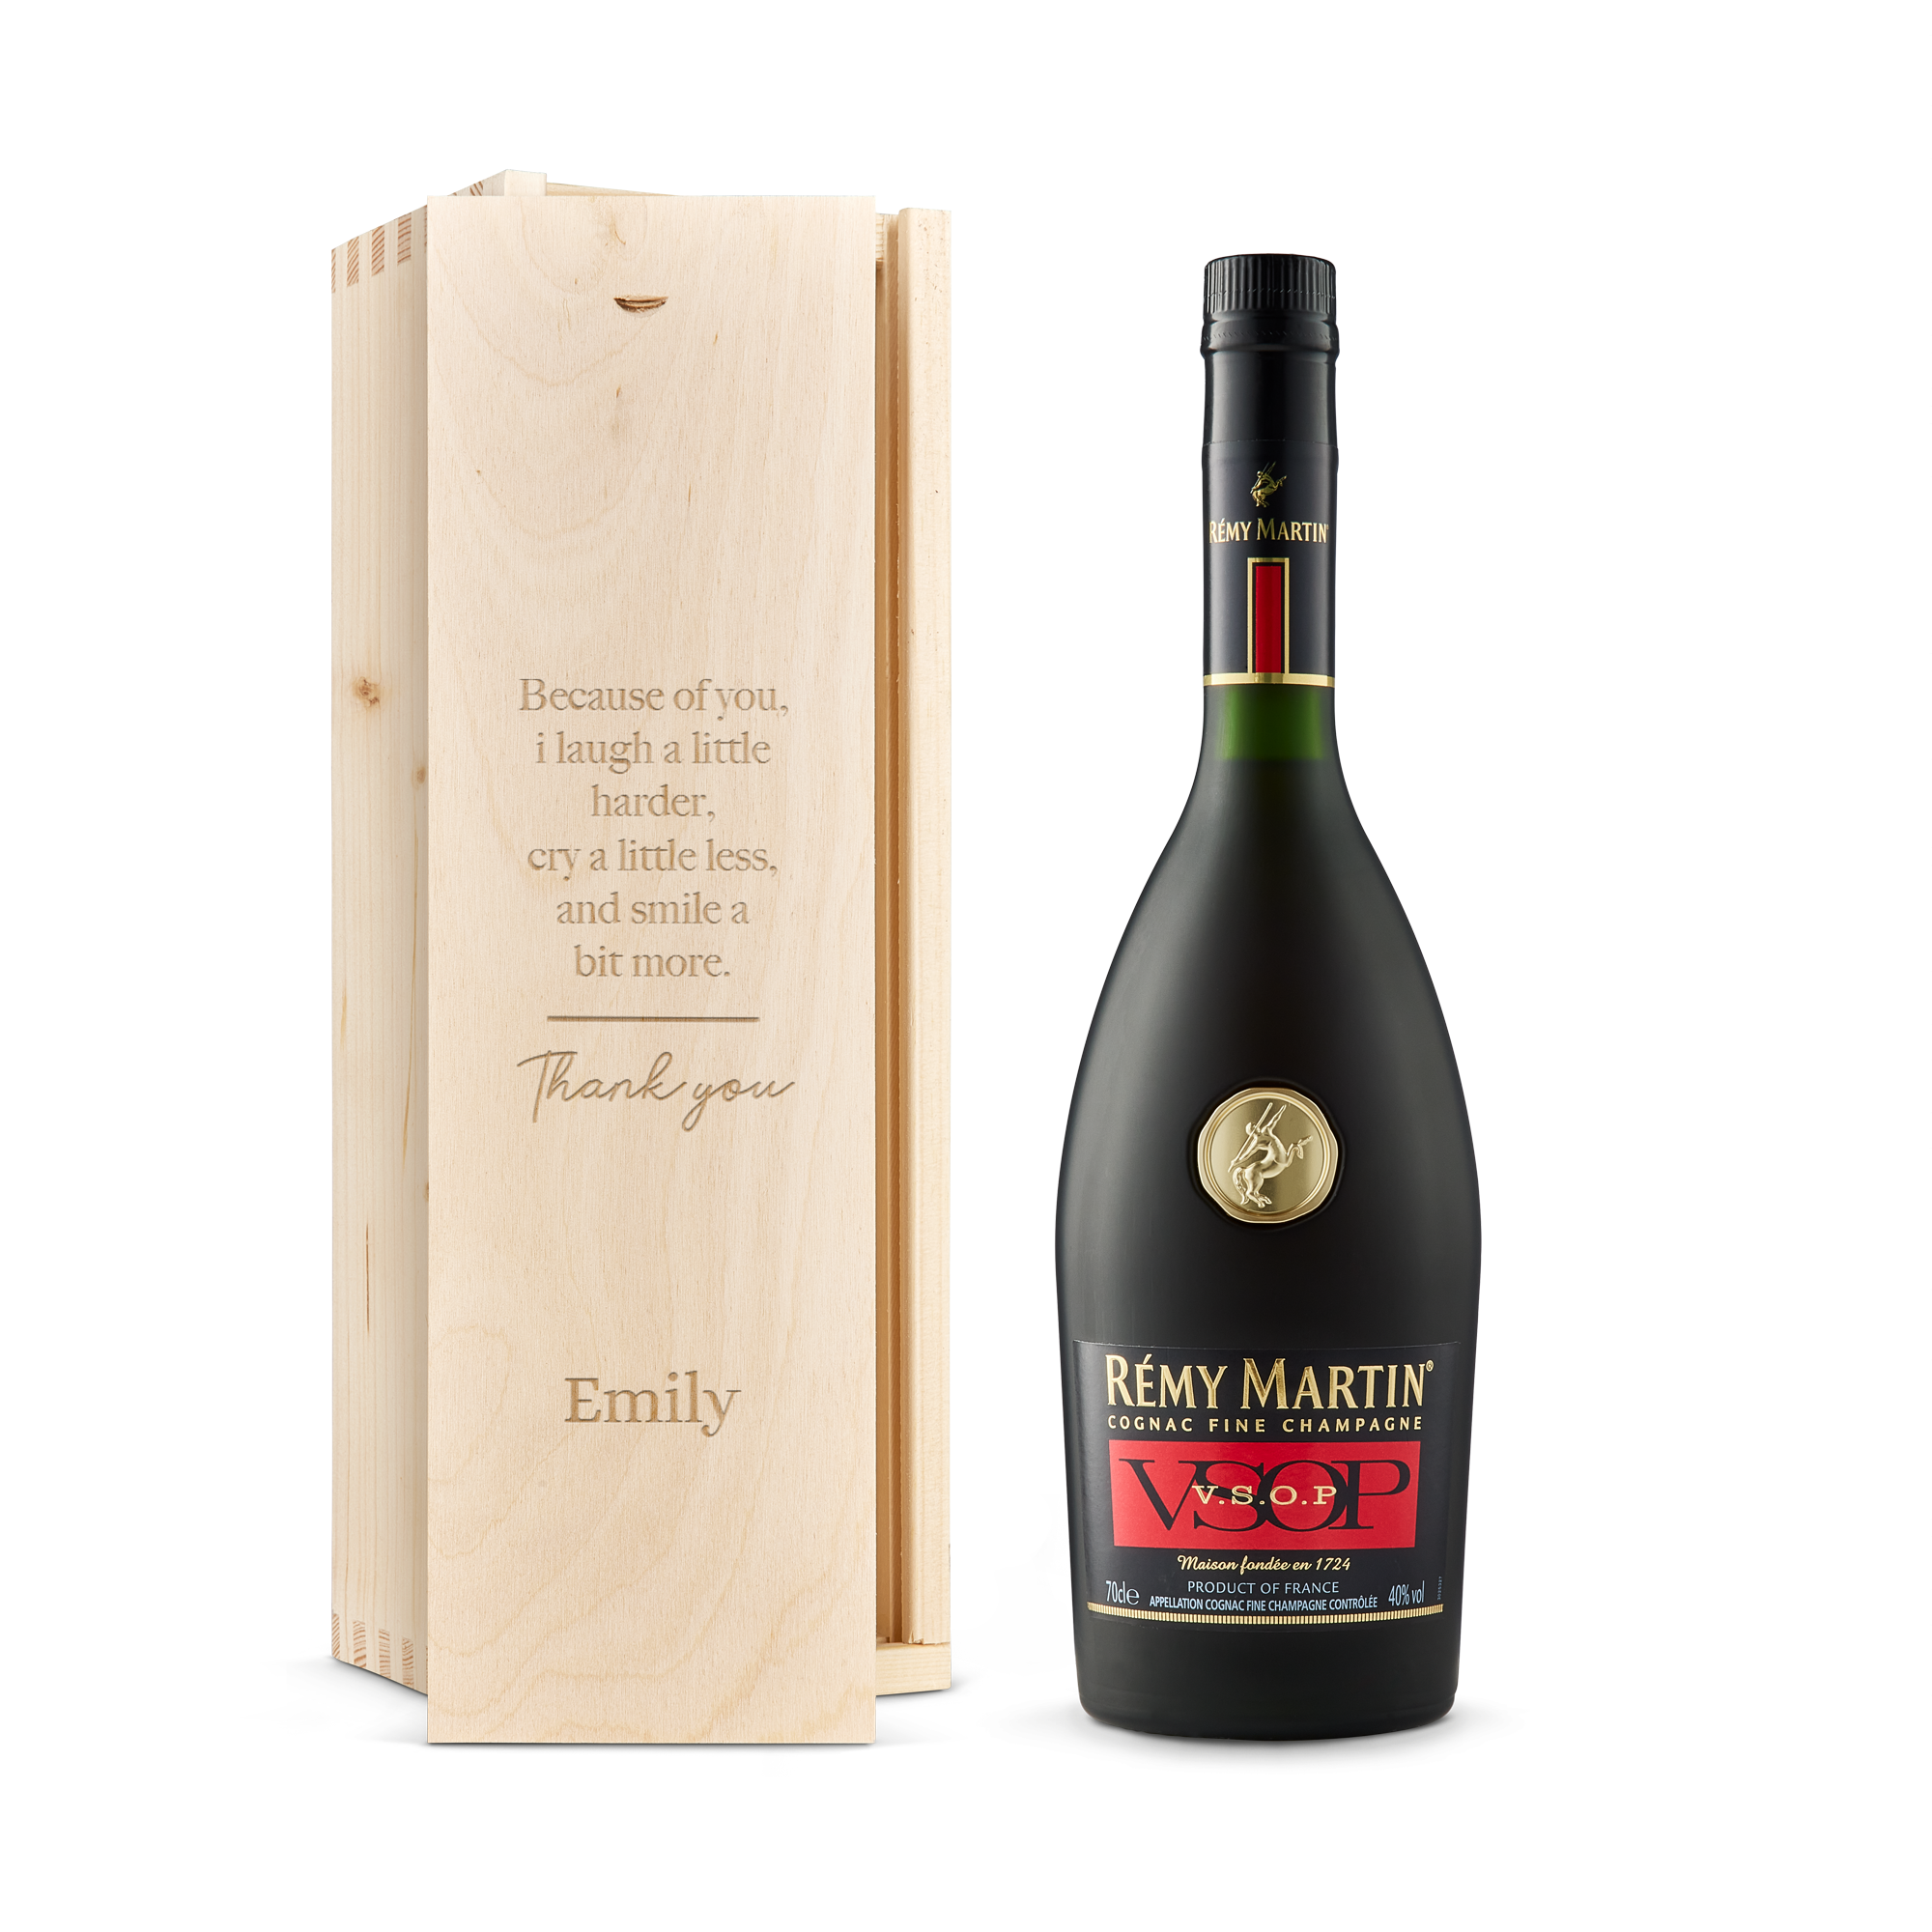 Personalised brandy gift - Remy Martin VSOP - Engraved wooden case